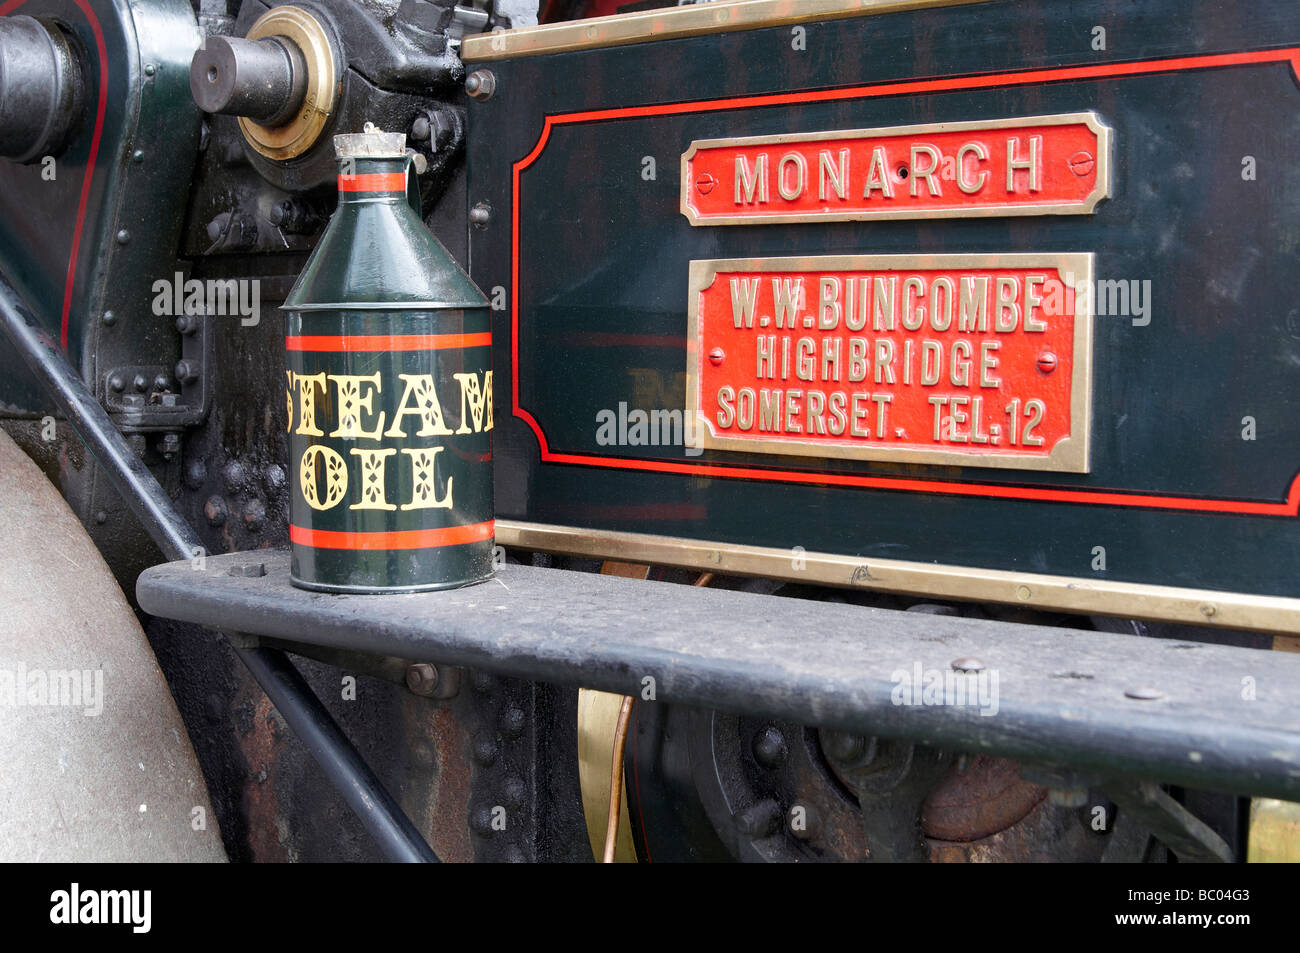 Bottle of steam oil ready to lubricate steam roller Monarch at a steam rally in Hampshire, England. Stock Photo